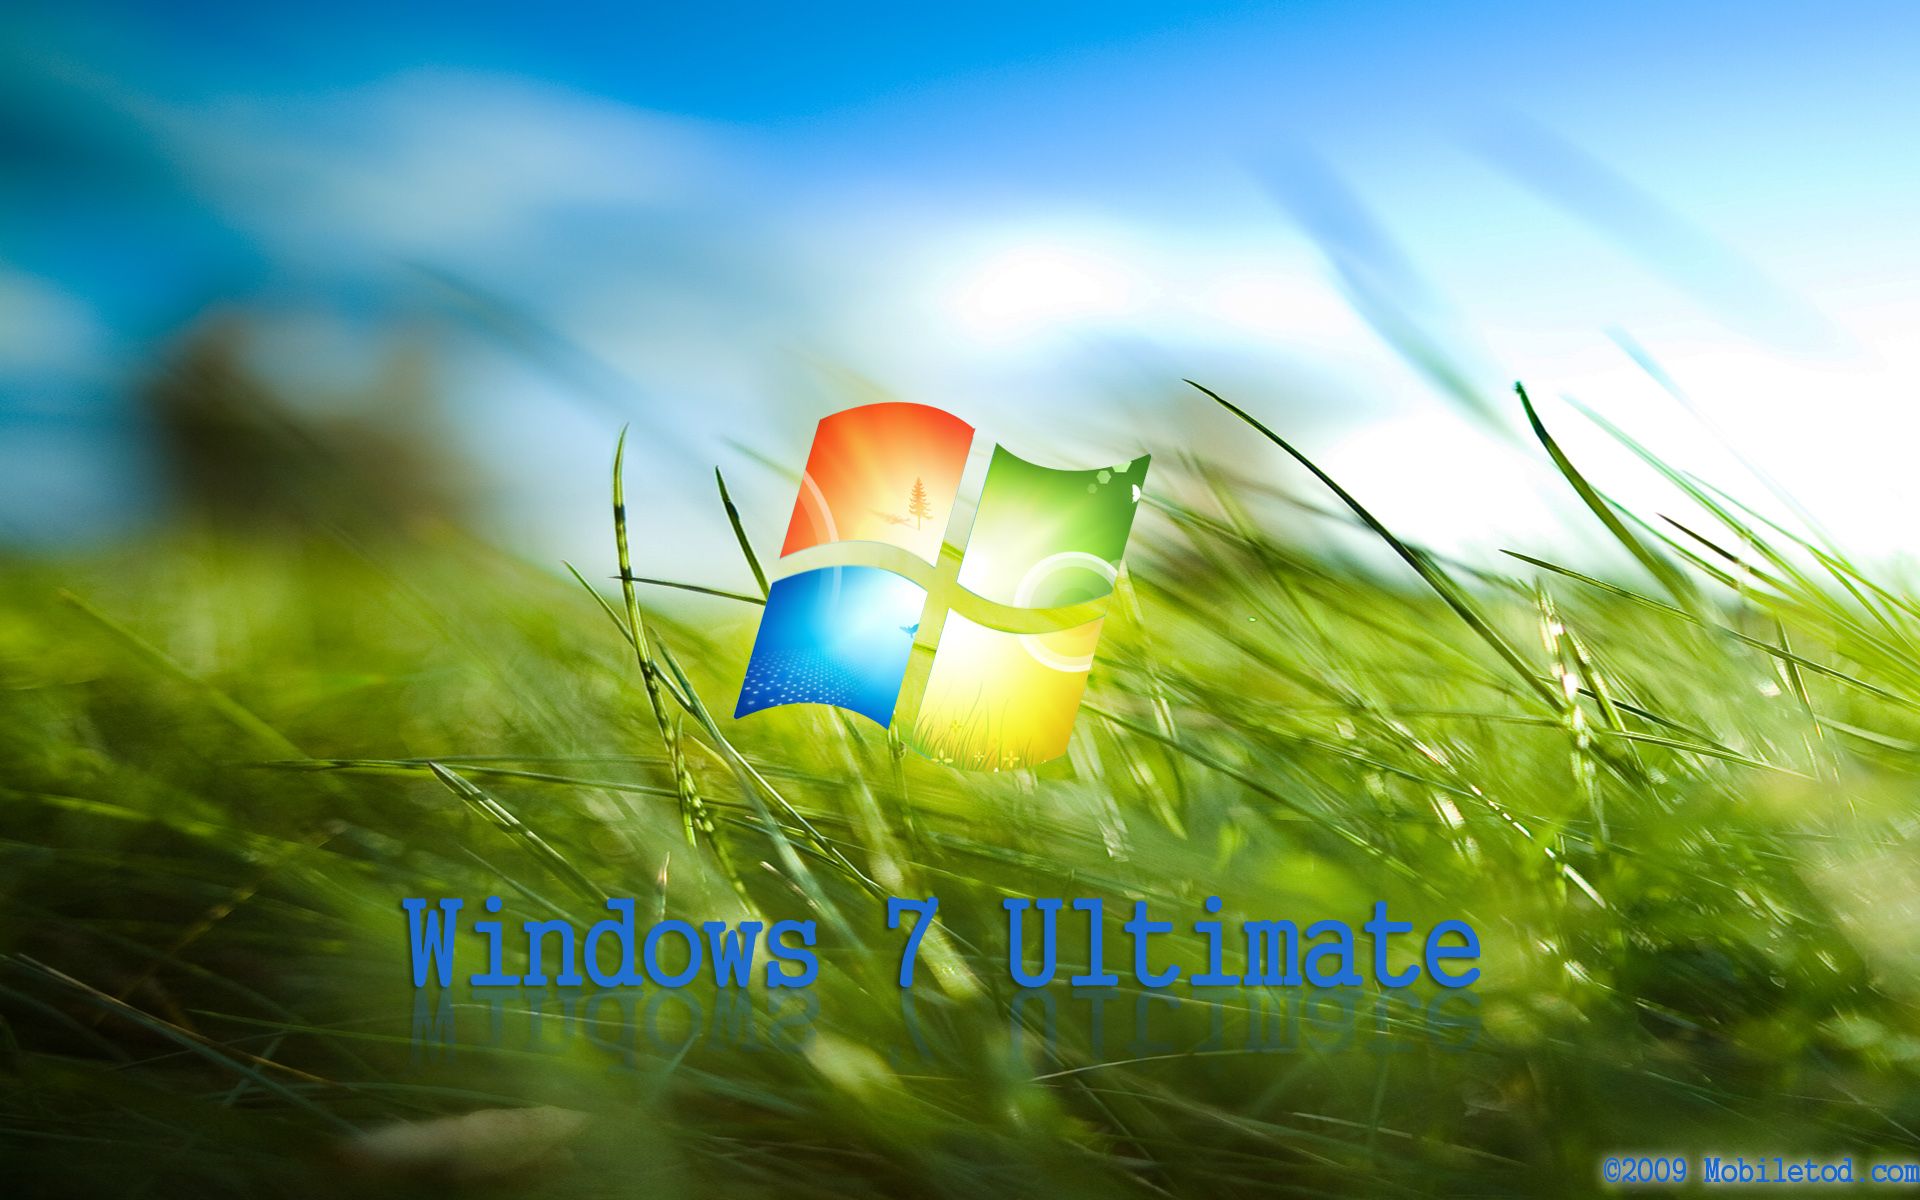 Free Wallpapers For Windows 7 Ultimate - www.proteckmachinery.com